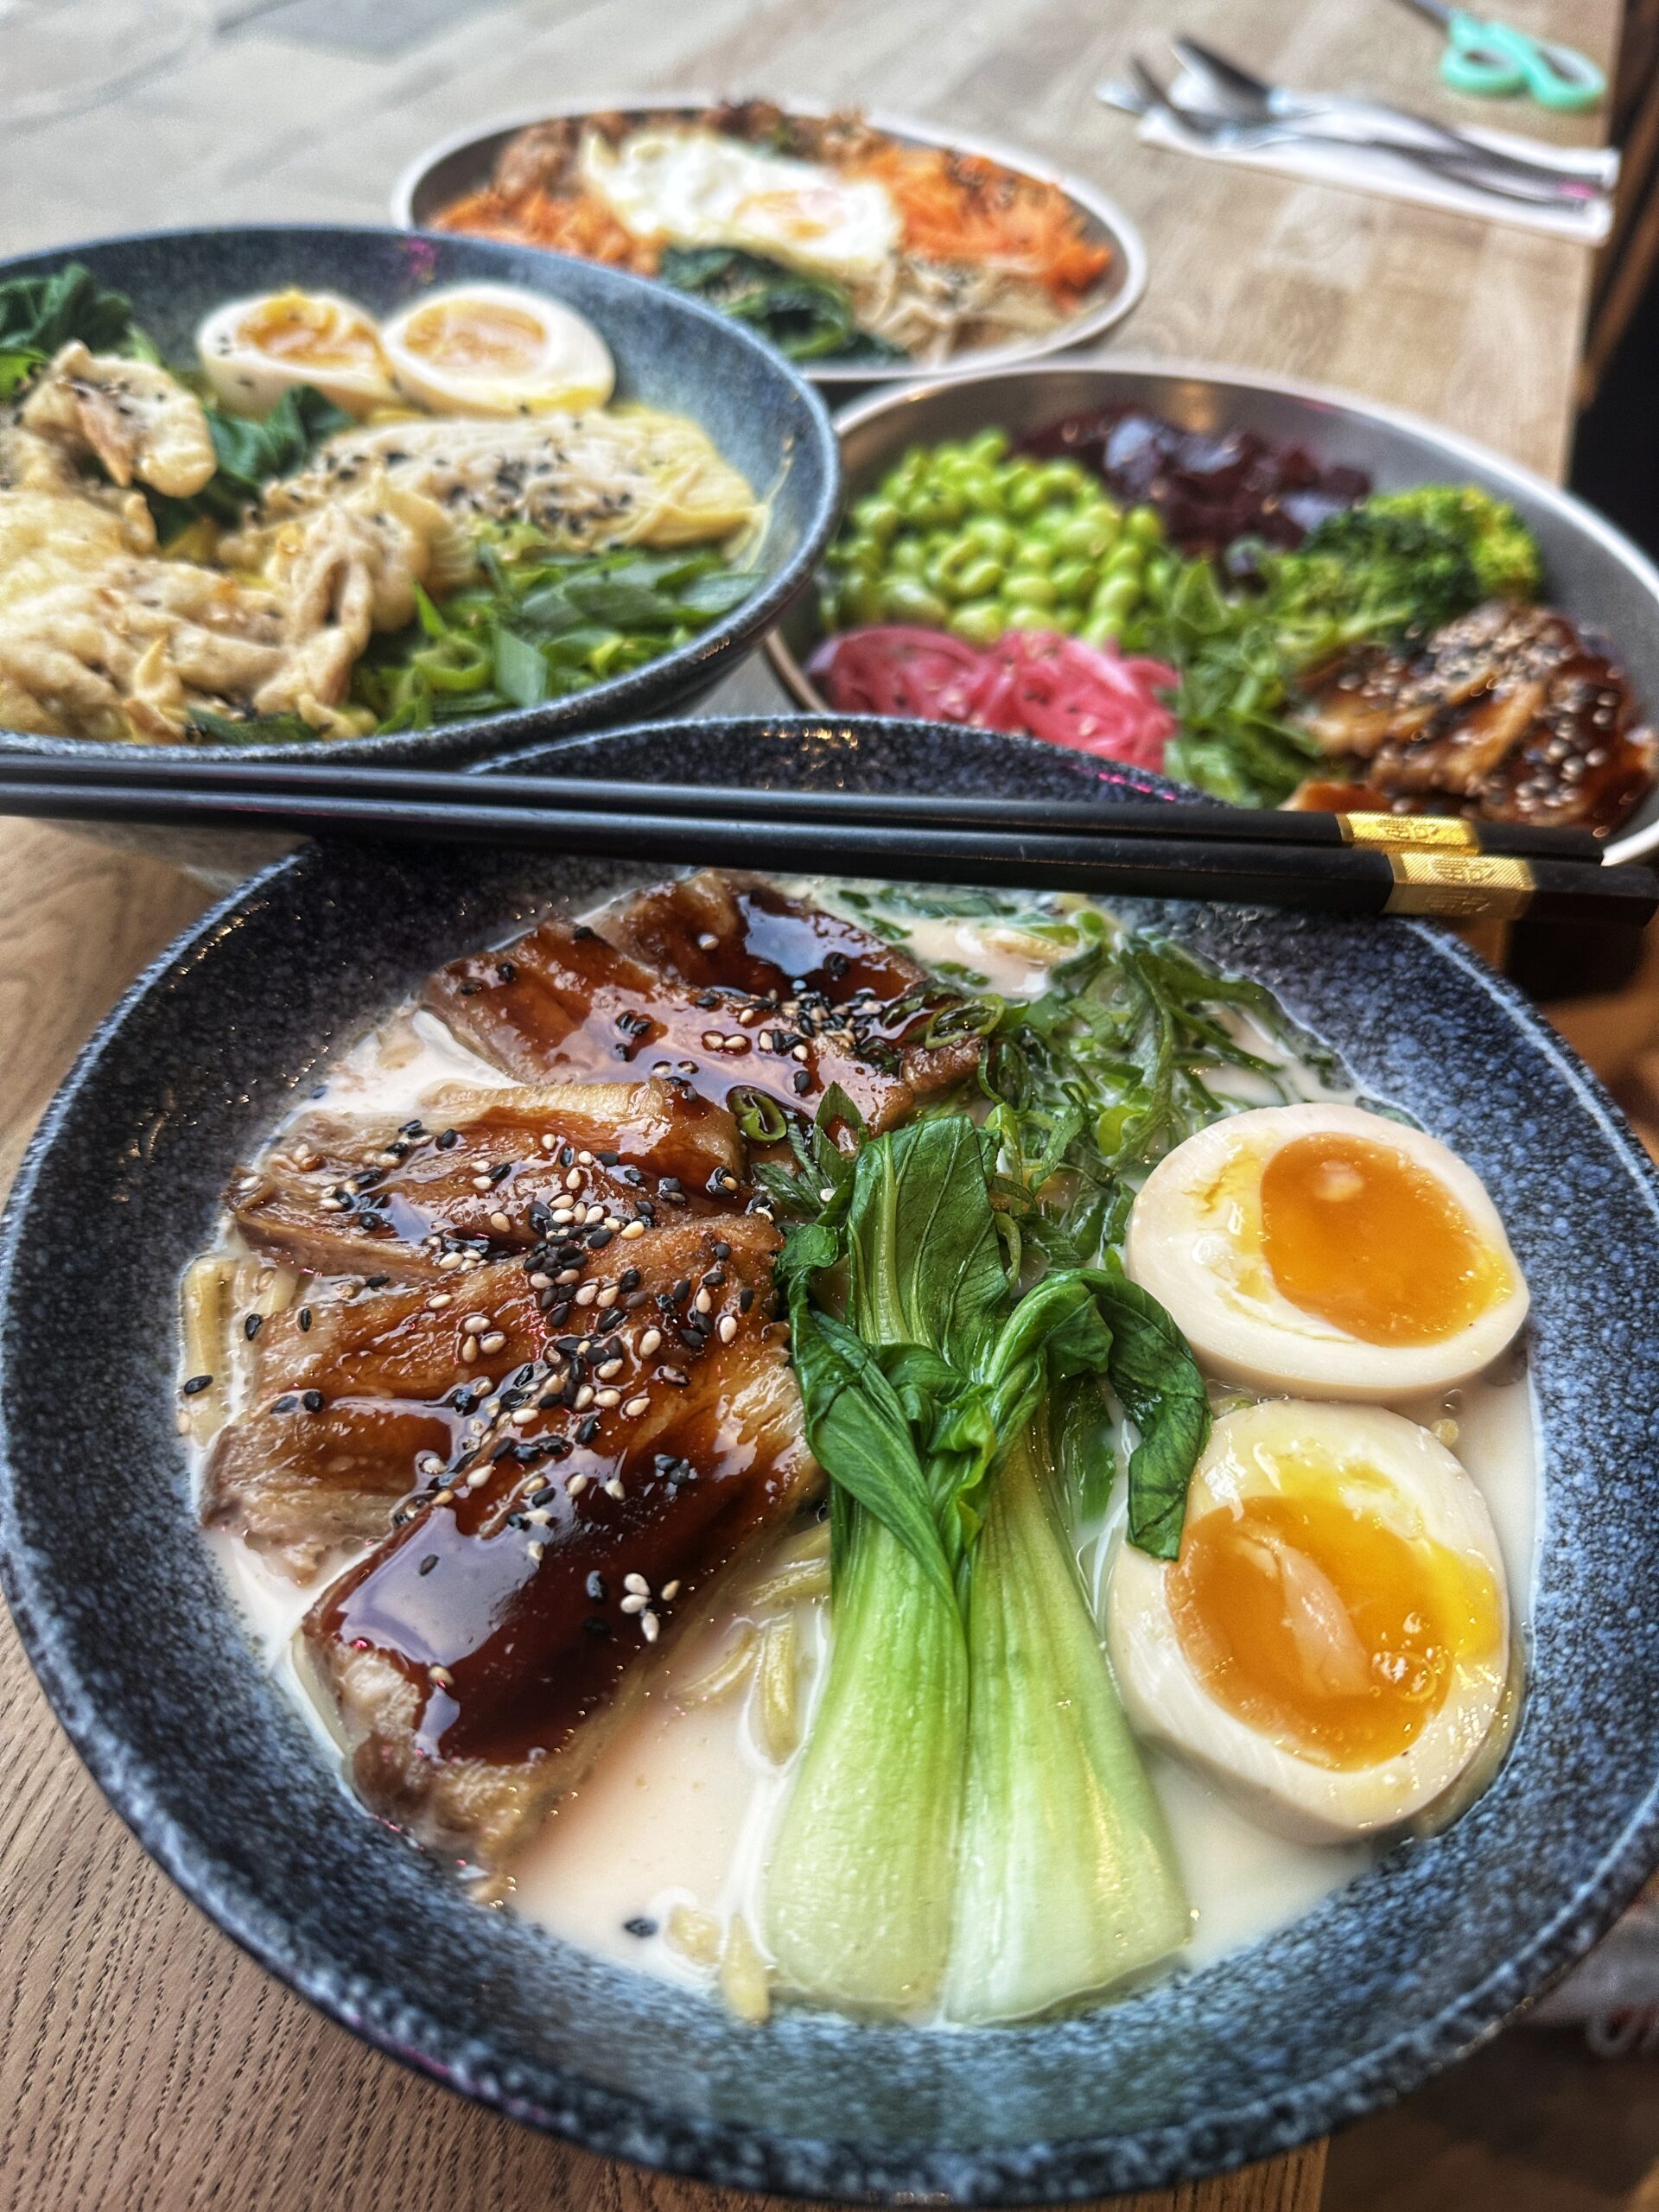 Suki Suki in Manchester has announced its January offer 